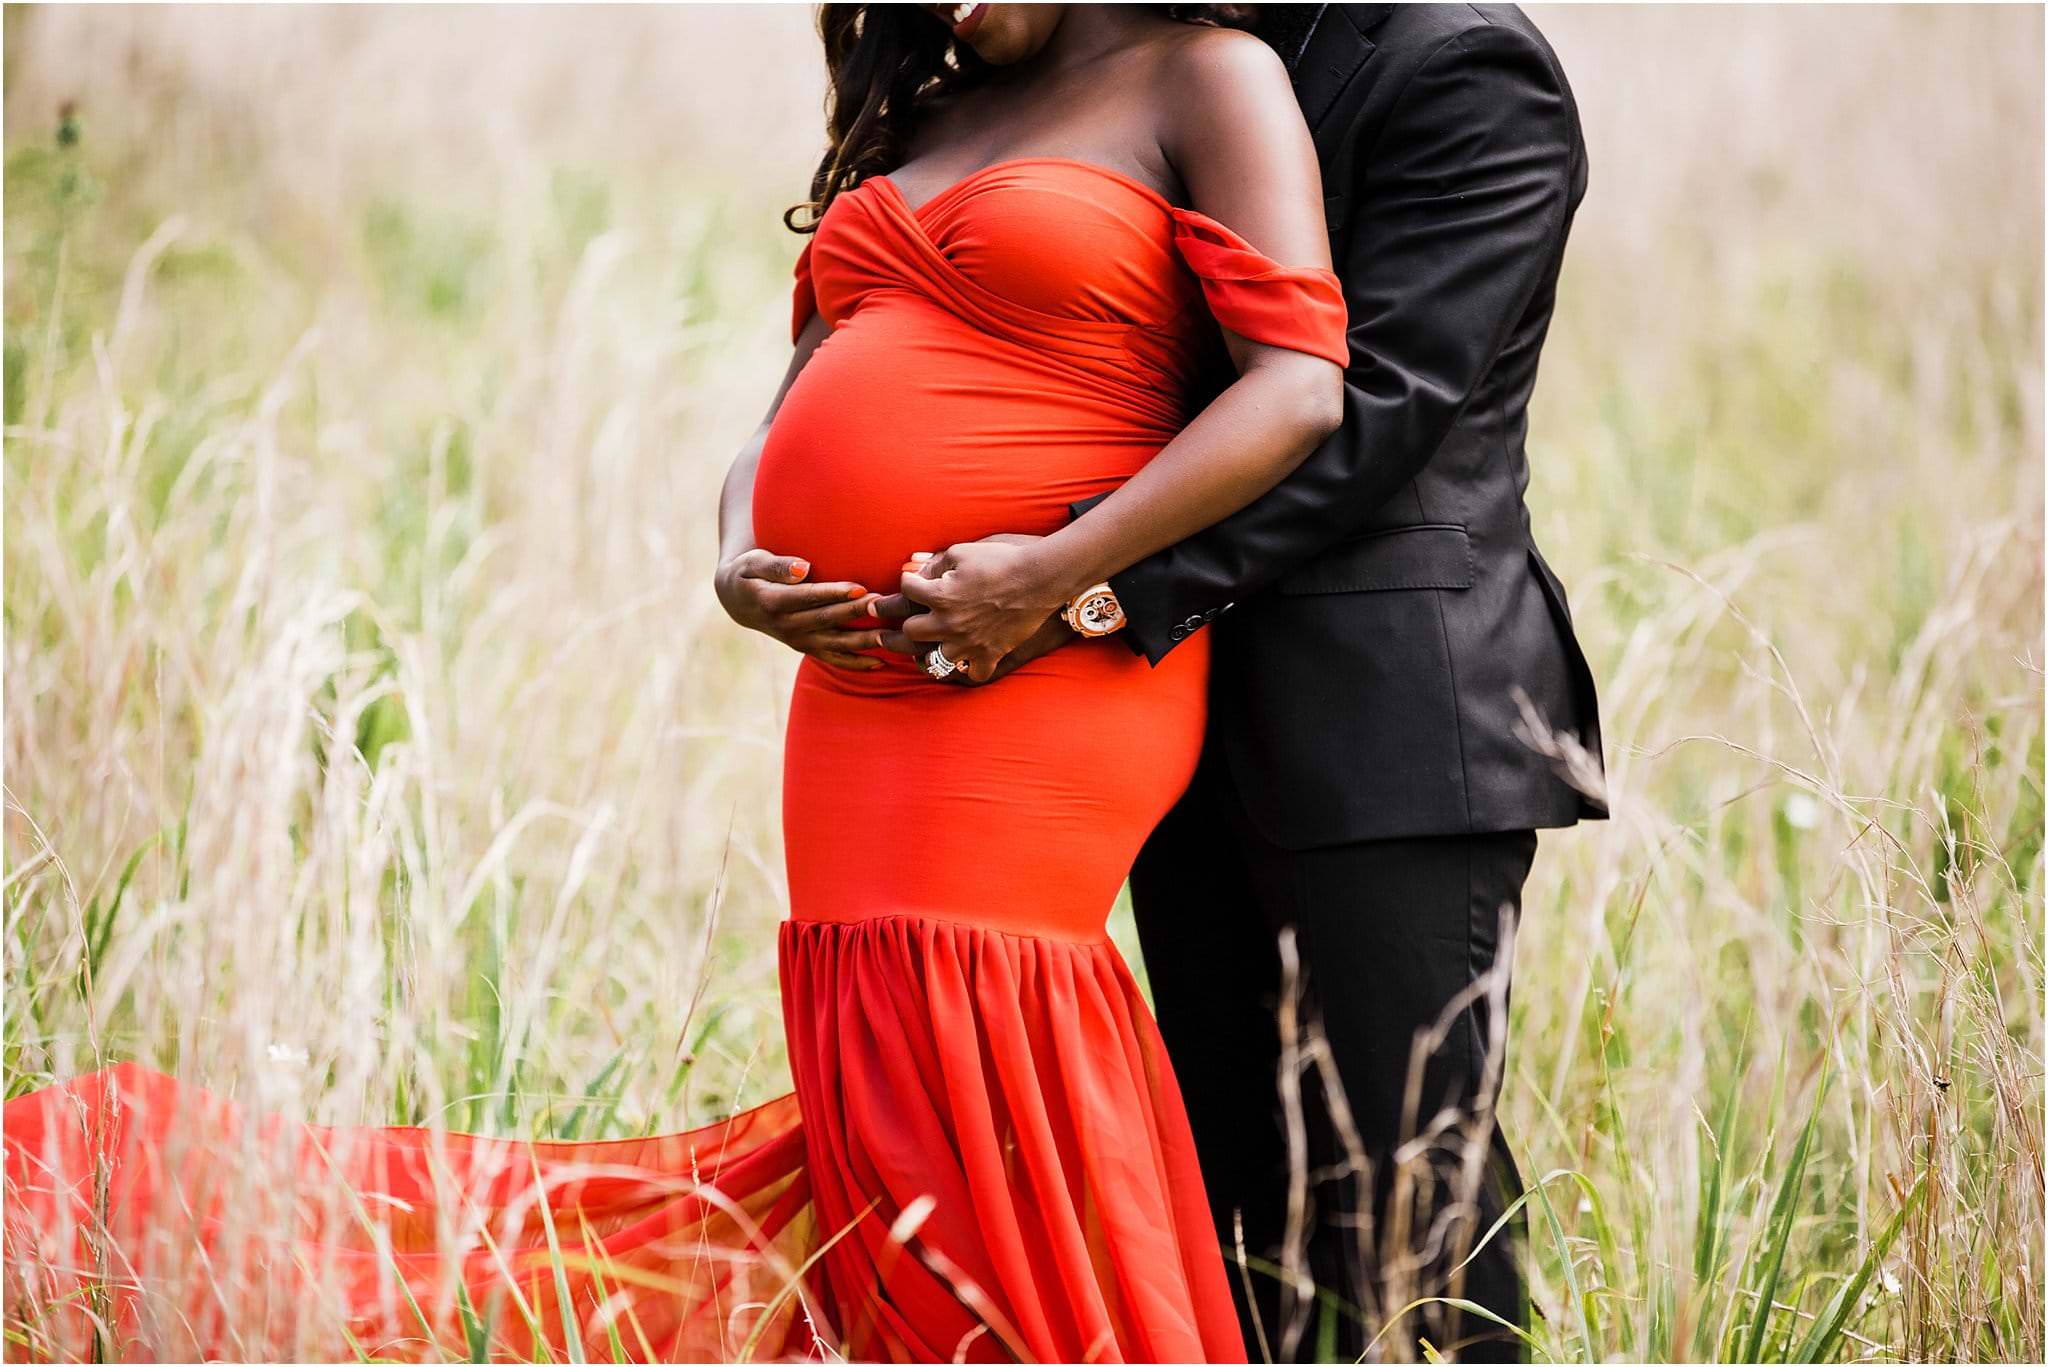 Glam red dress maternity photos 